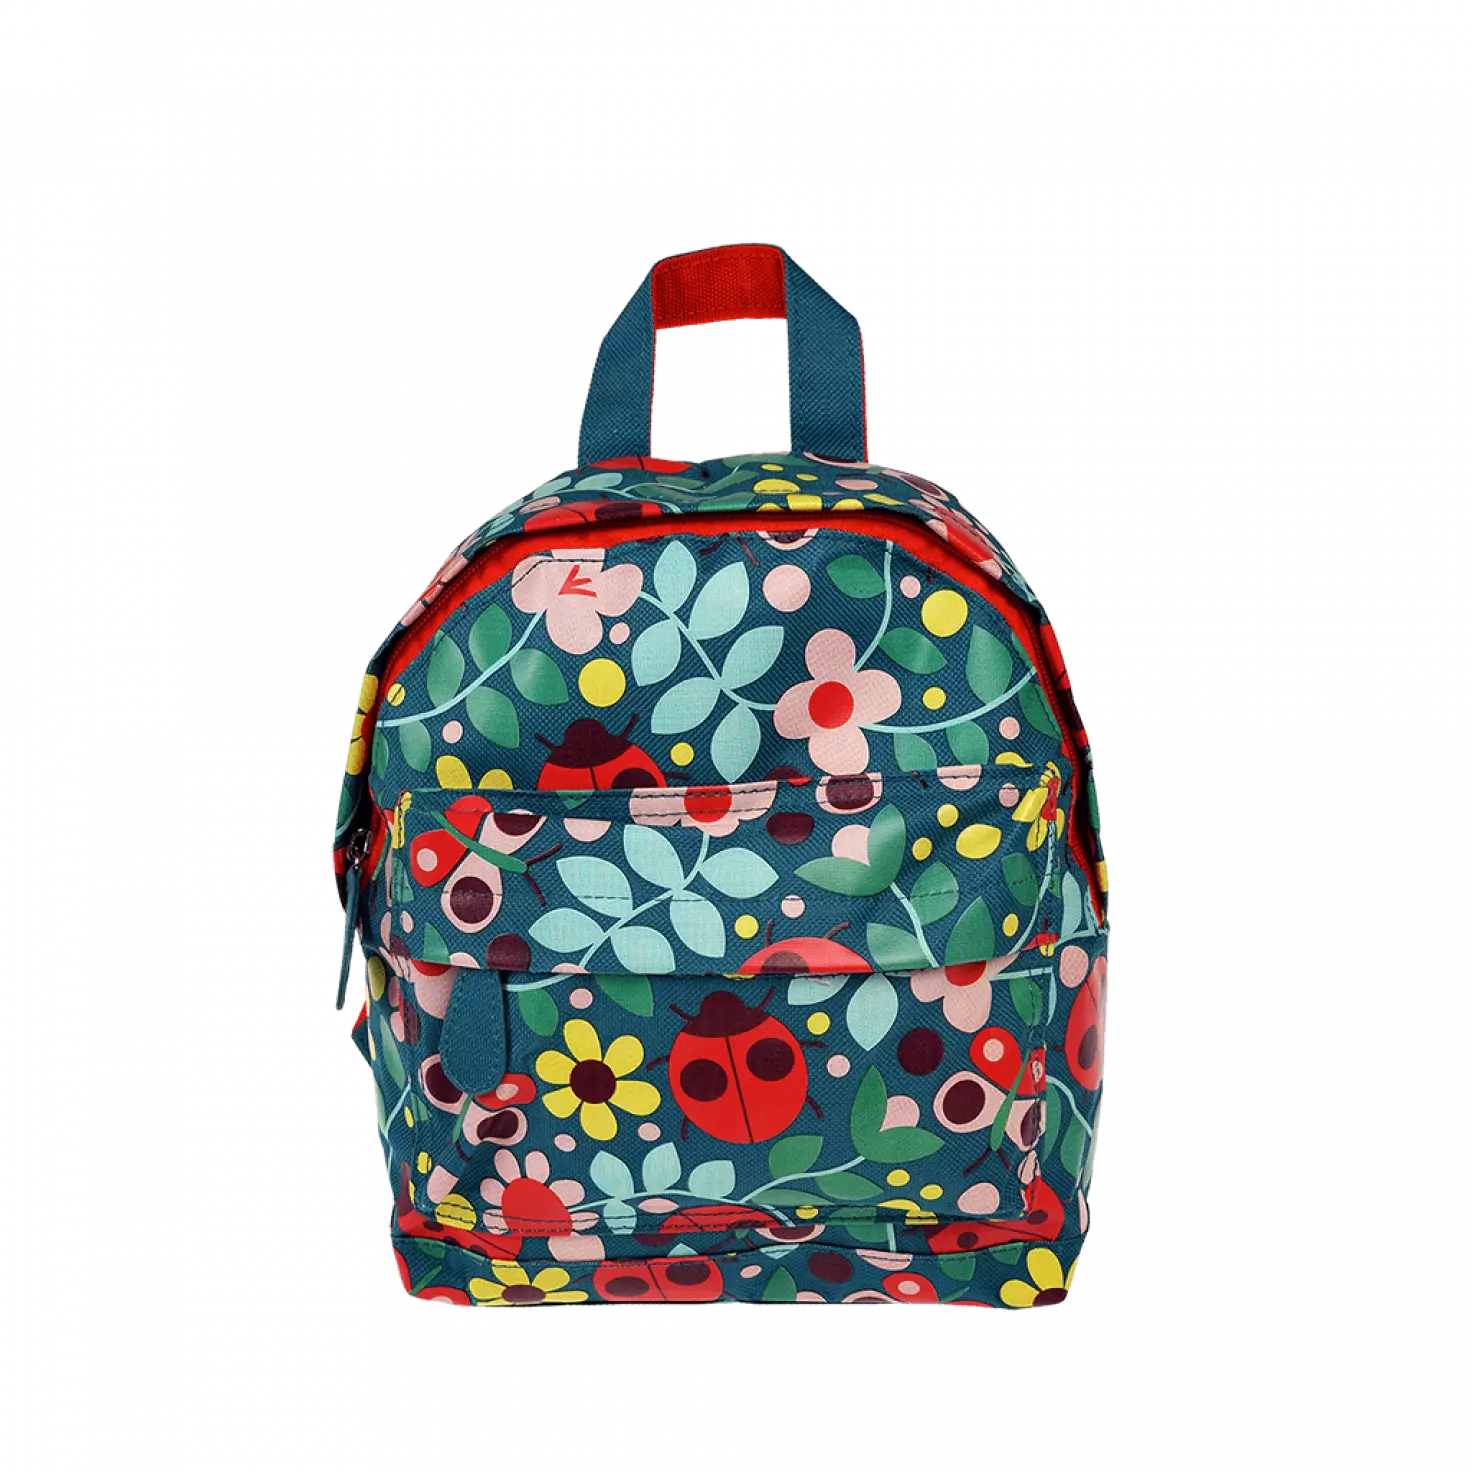 A childs backpack by Rex London, style Ladybird, in blue with multi ladybird and floral print. Two compartments with zip fastening. Front view.